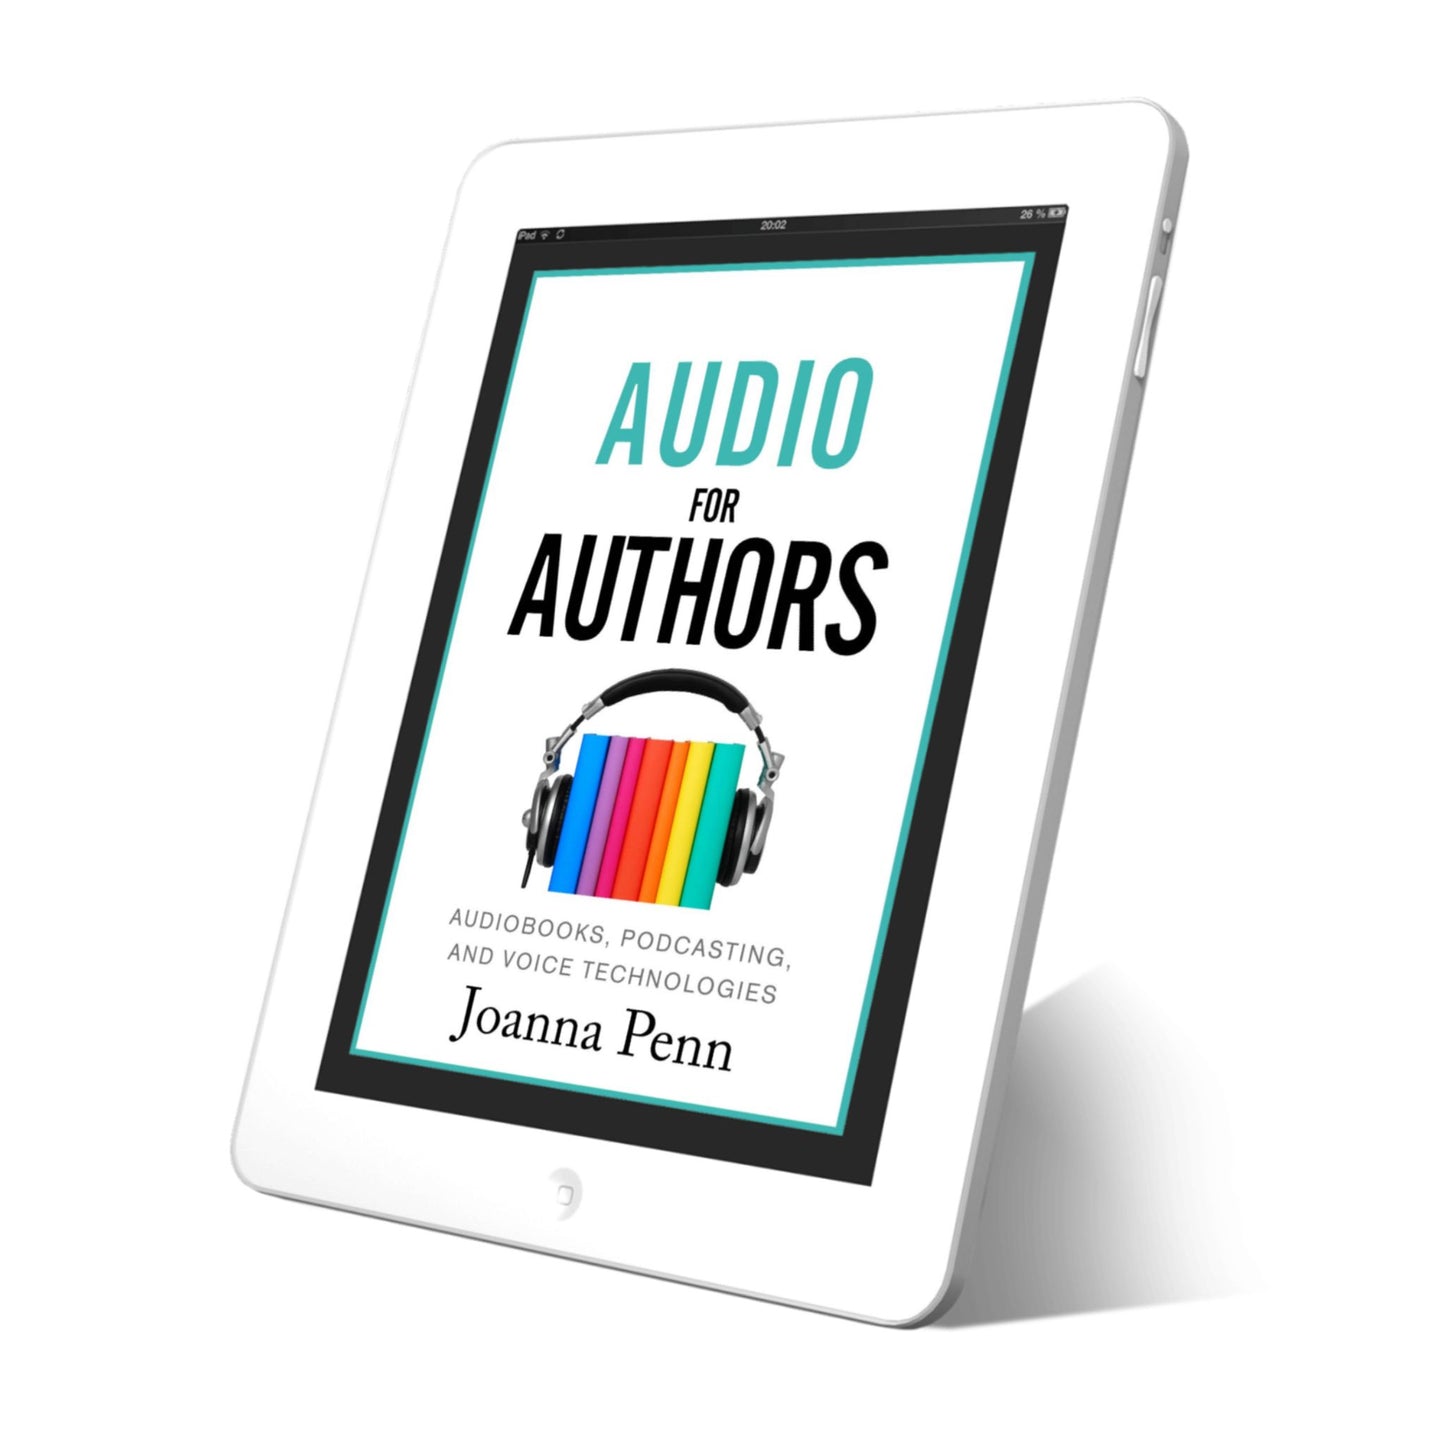 Audio For Authors: Audiobooks, Podcasting, and Voice Technologies Ebook